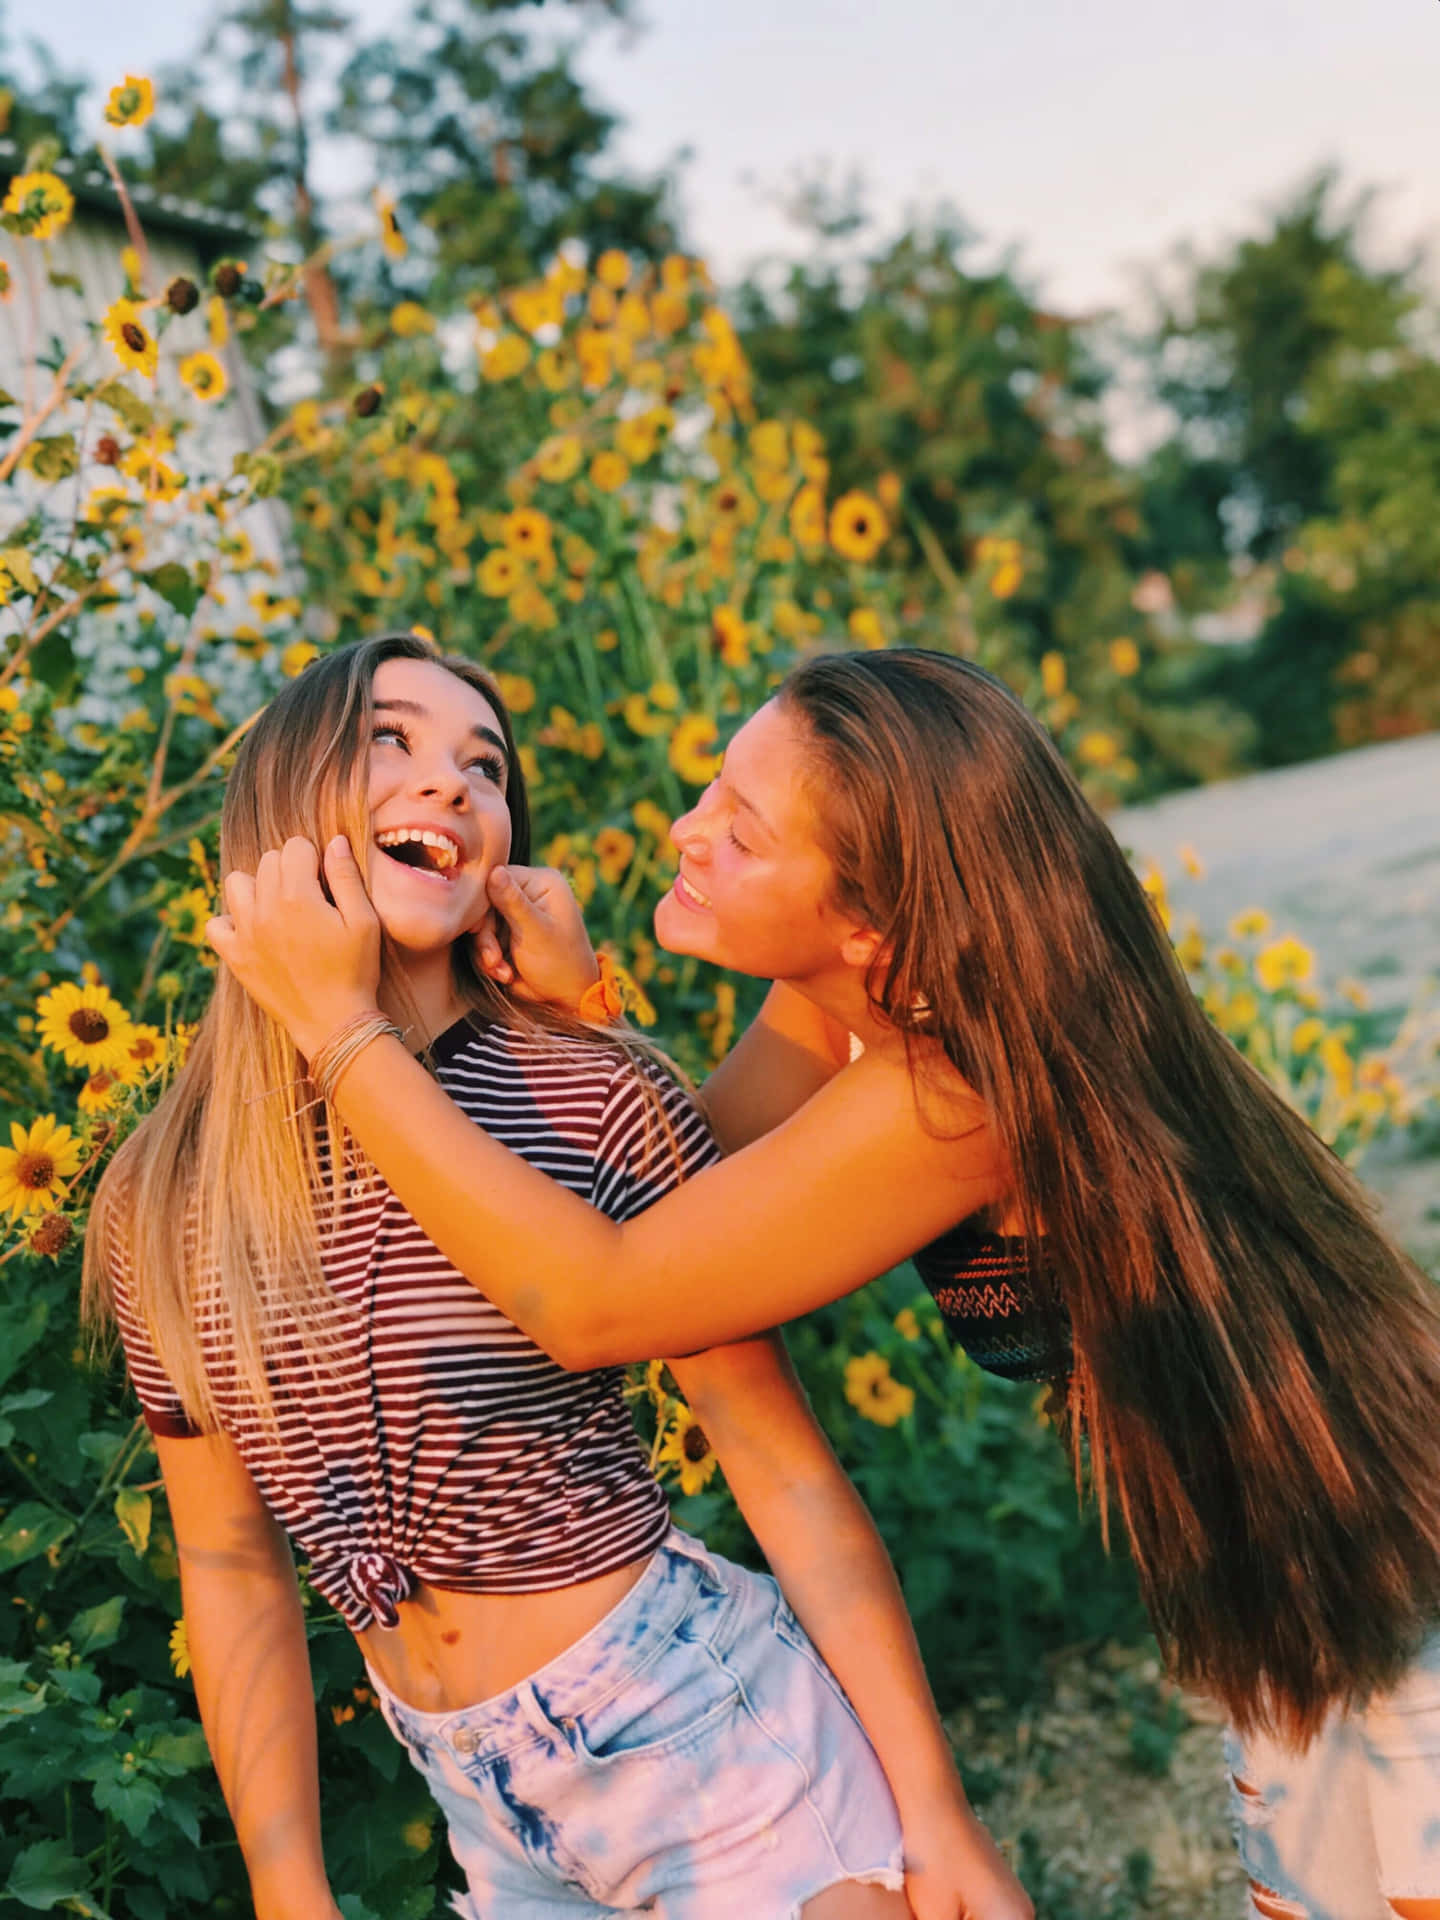 Cute Bff Pinching With Sunflower Picture